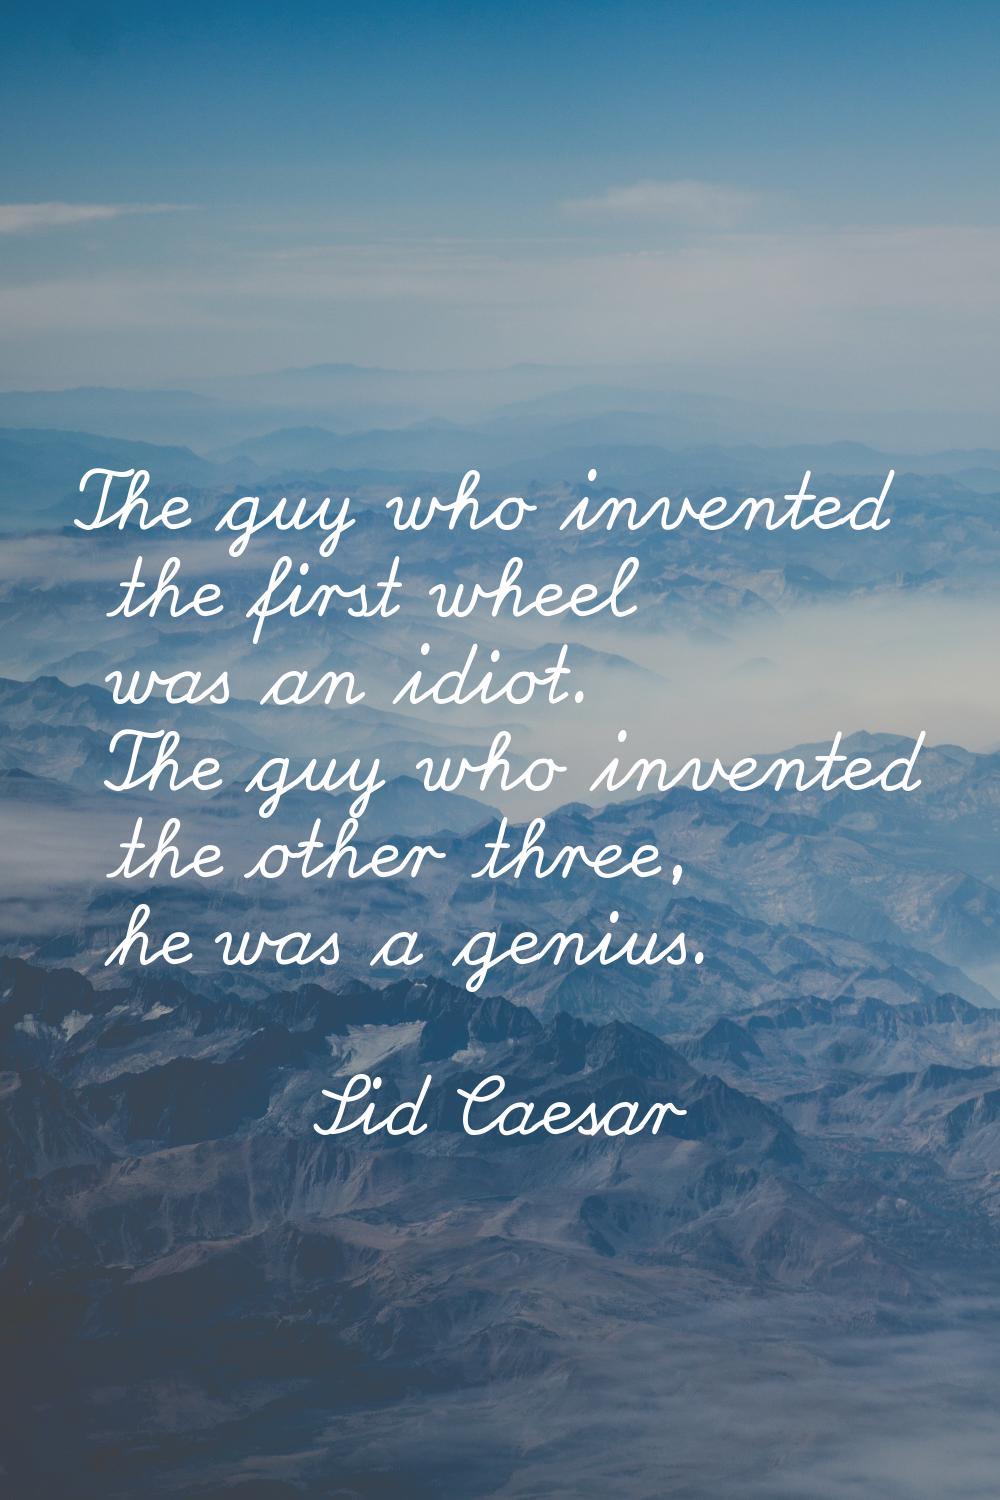 The guy who invented the first wheel was an idiot. The guy who invented the other three, he was a g